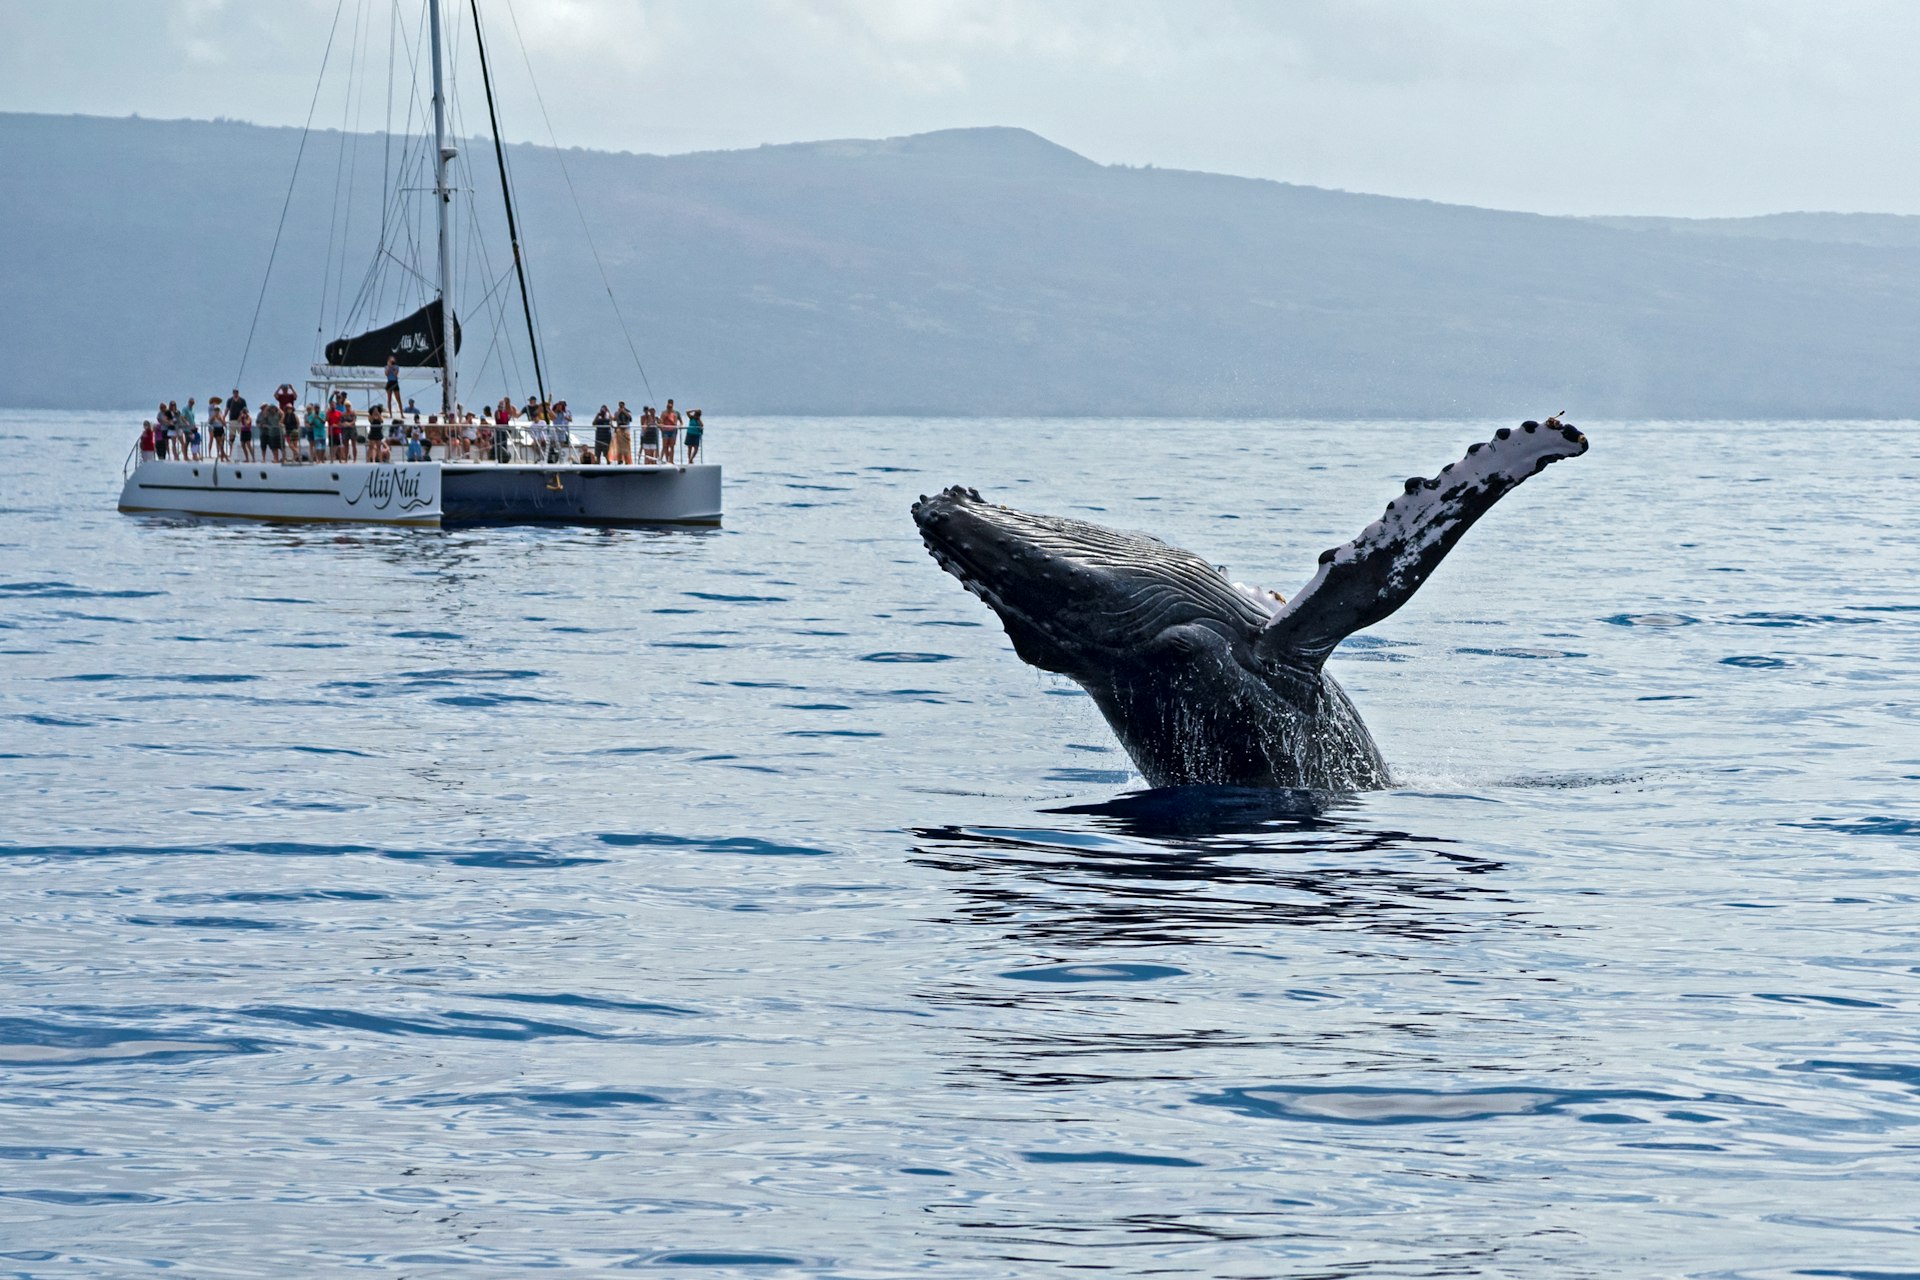 A humpback whale is breaching the surface of the sea off Maui, and there is a boat full of whale-watching tourists in the background 